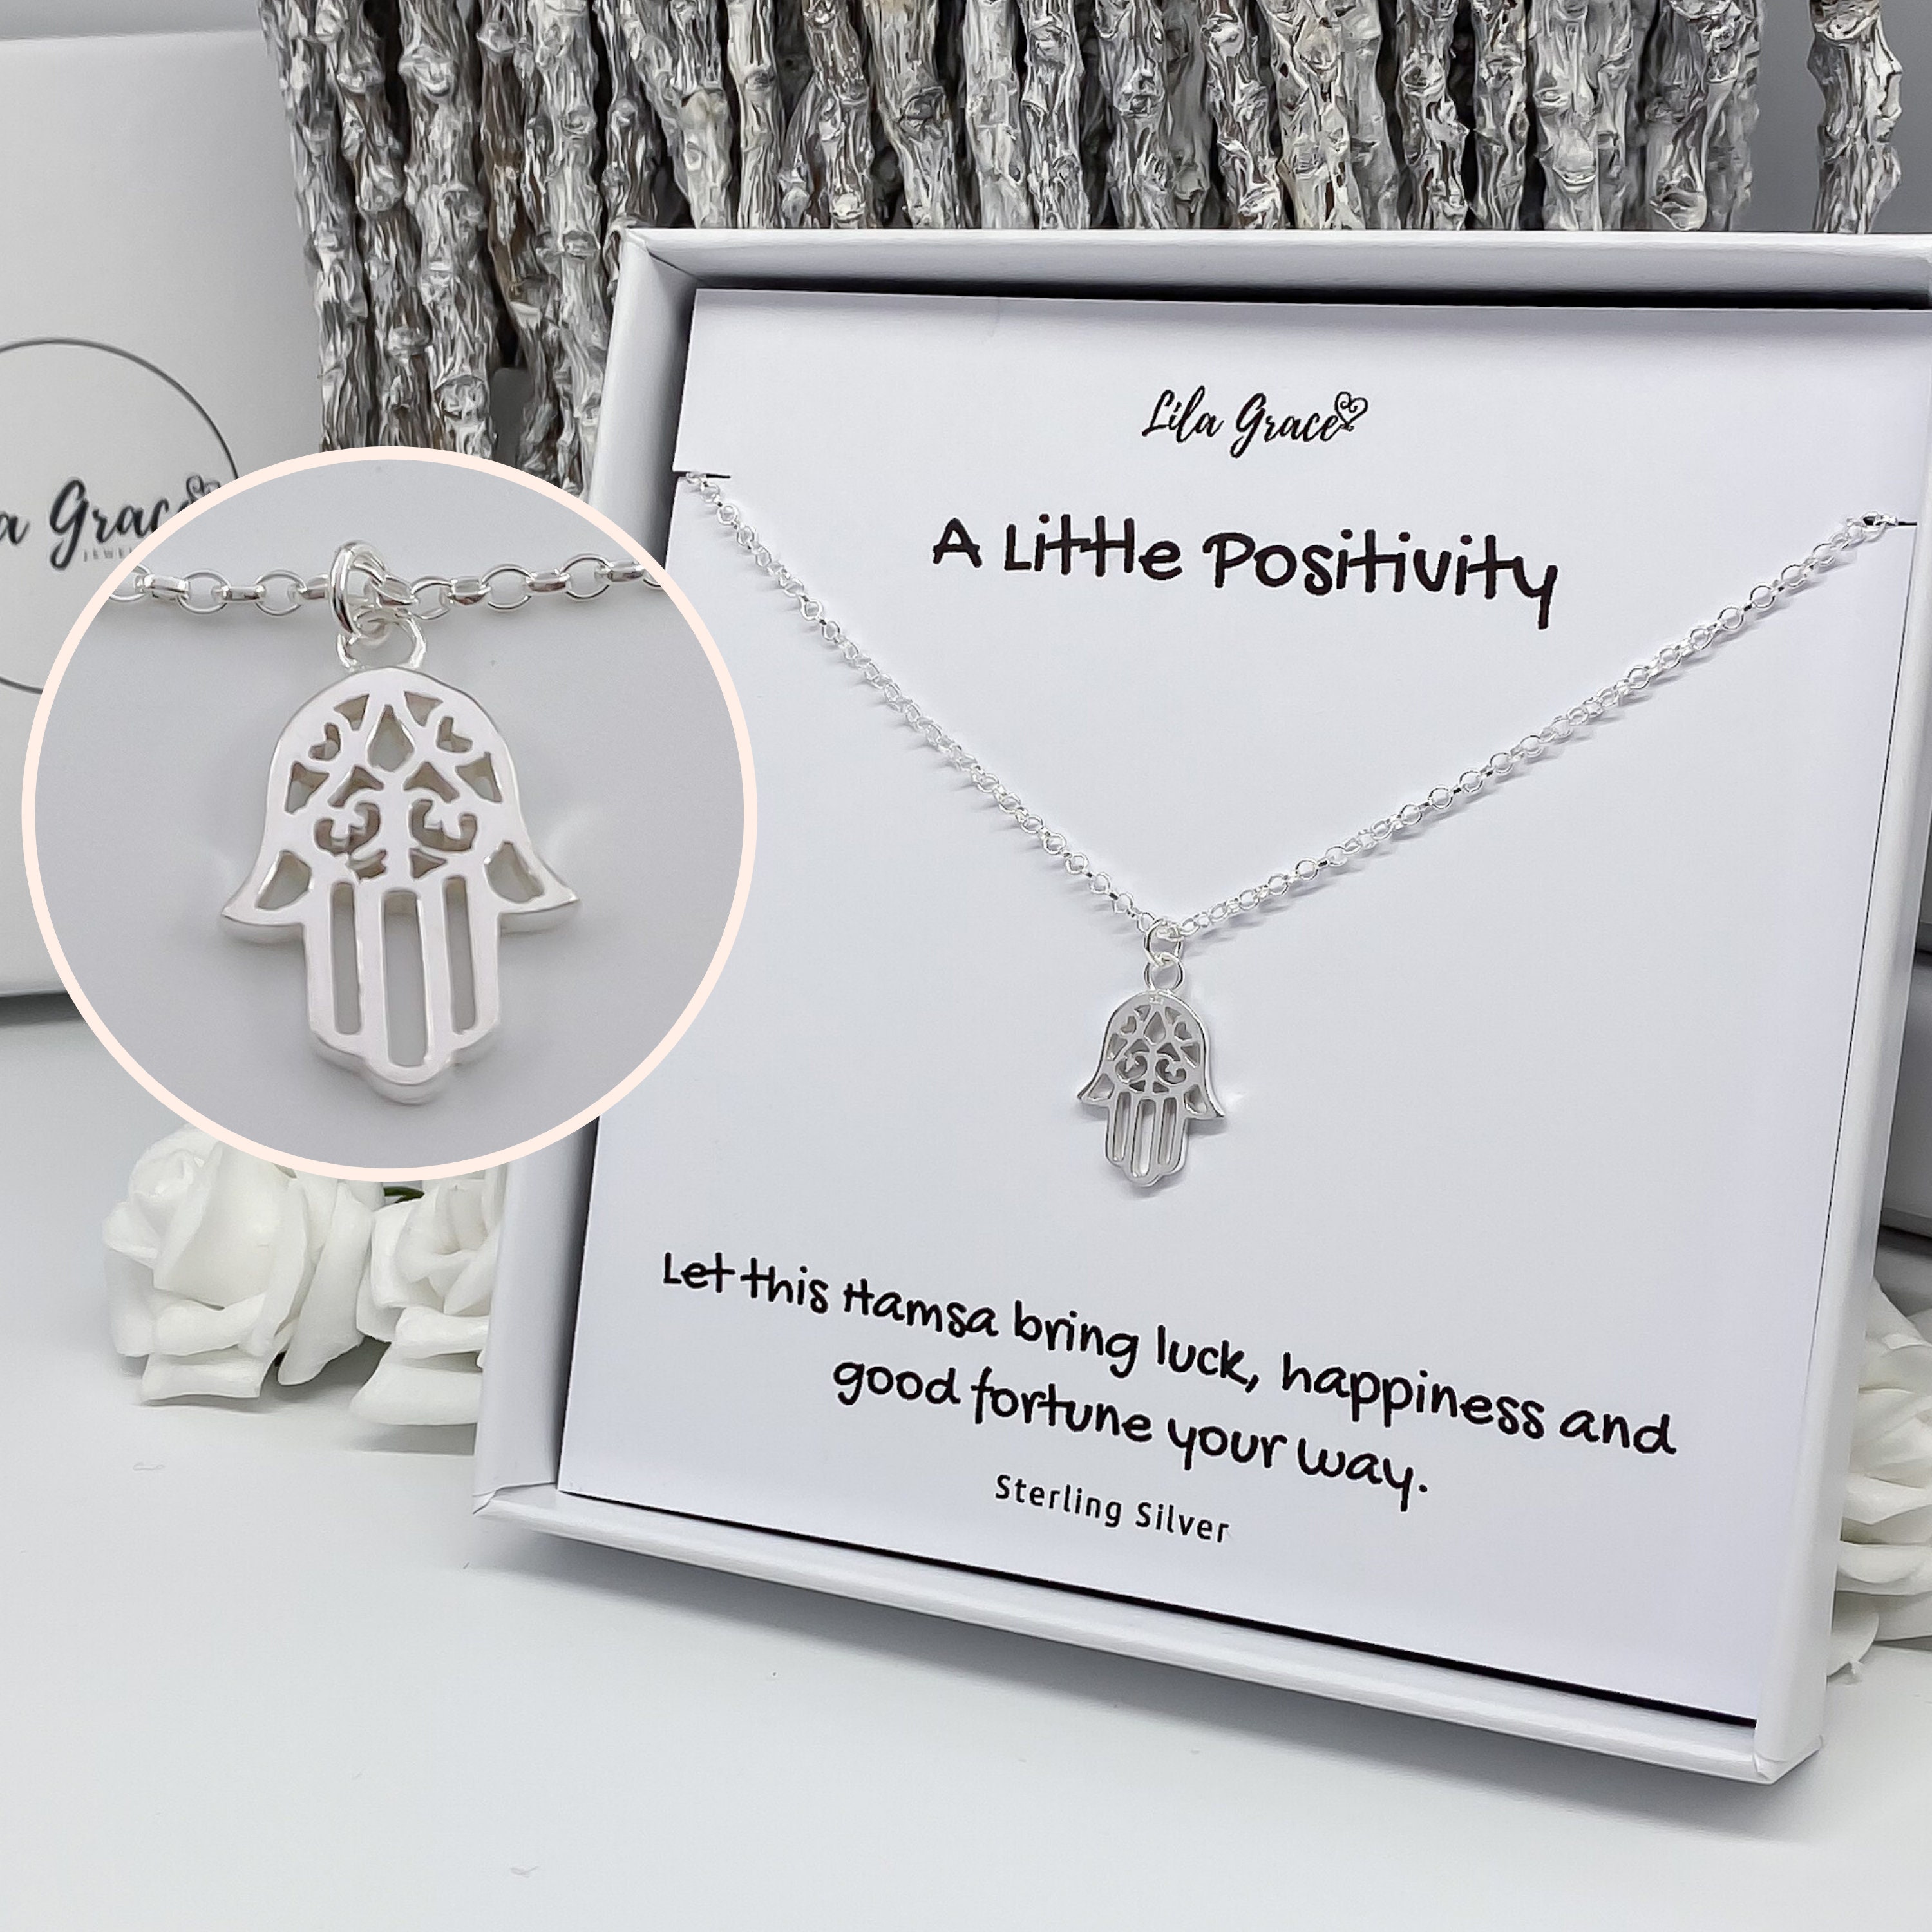 erfreut sich rasant wachsender Beliebtheit Positivity Sterling Silver Hamsa Womens Girls Christmas Thoughtful Idea Boho - Necklace Etsy Birthday Her Gifts PERSONALISED Gift for Hippy